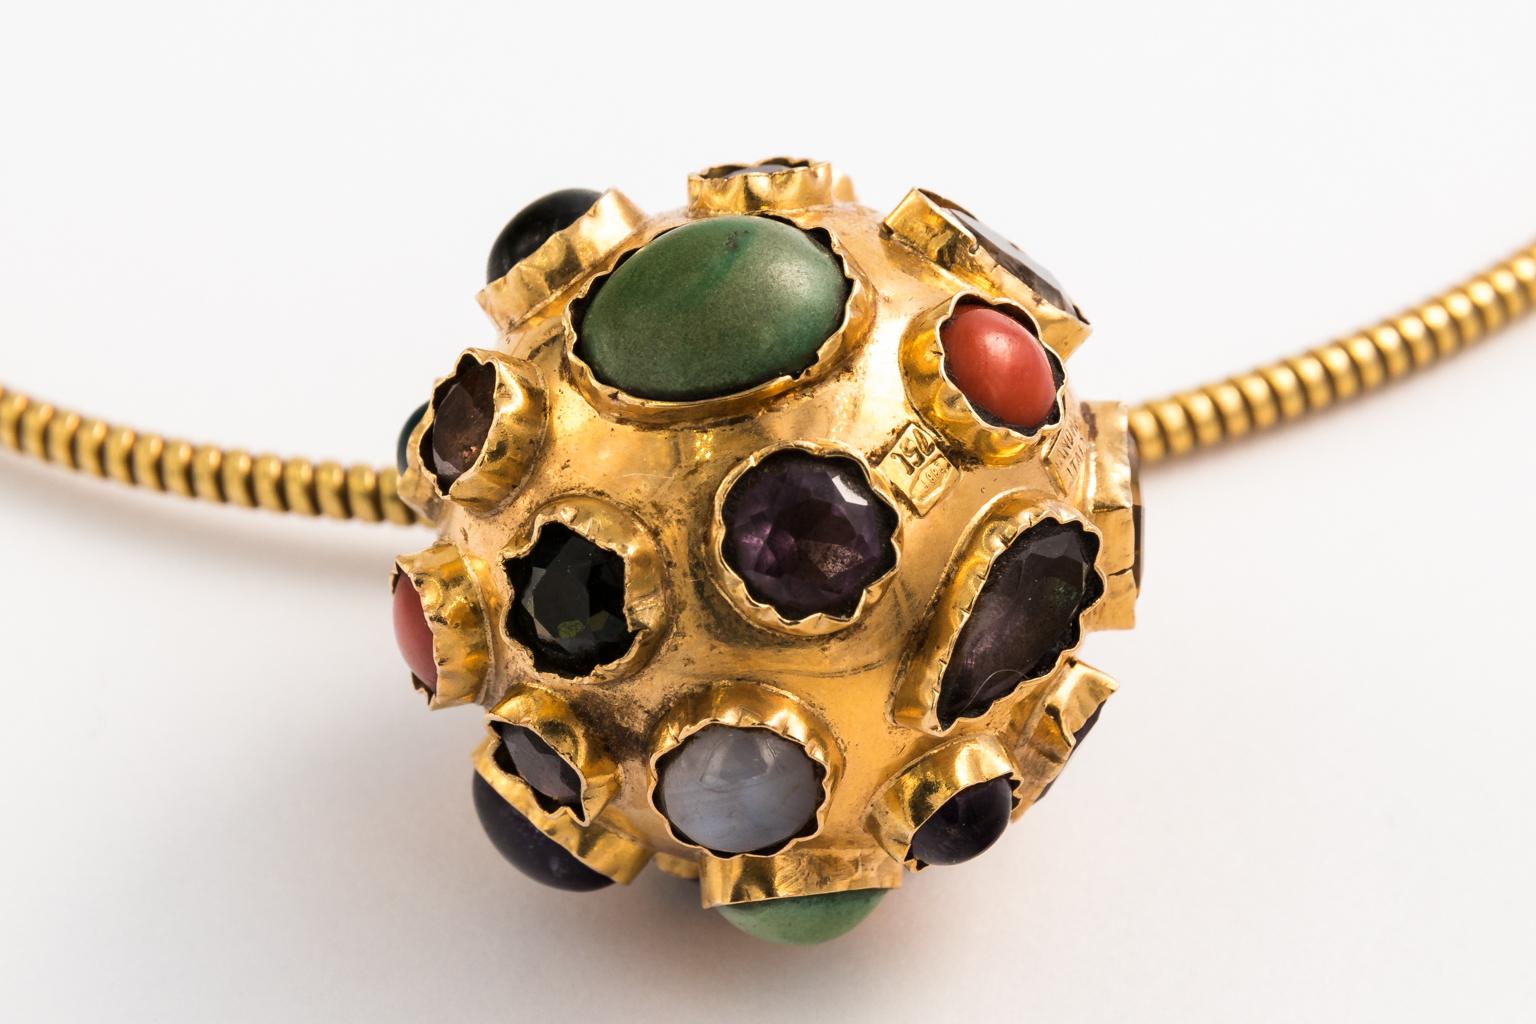 Circa 1960s 18 karat gold and gem studded charm necklace from Italy, with spring-like chain and multi-gems hand set all over the surface. Includes Turquoise, Citrine, Amethyst,Kunzite, Coral, Moonstone,and Topaz.
